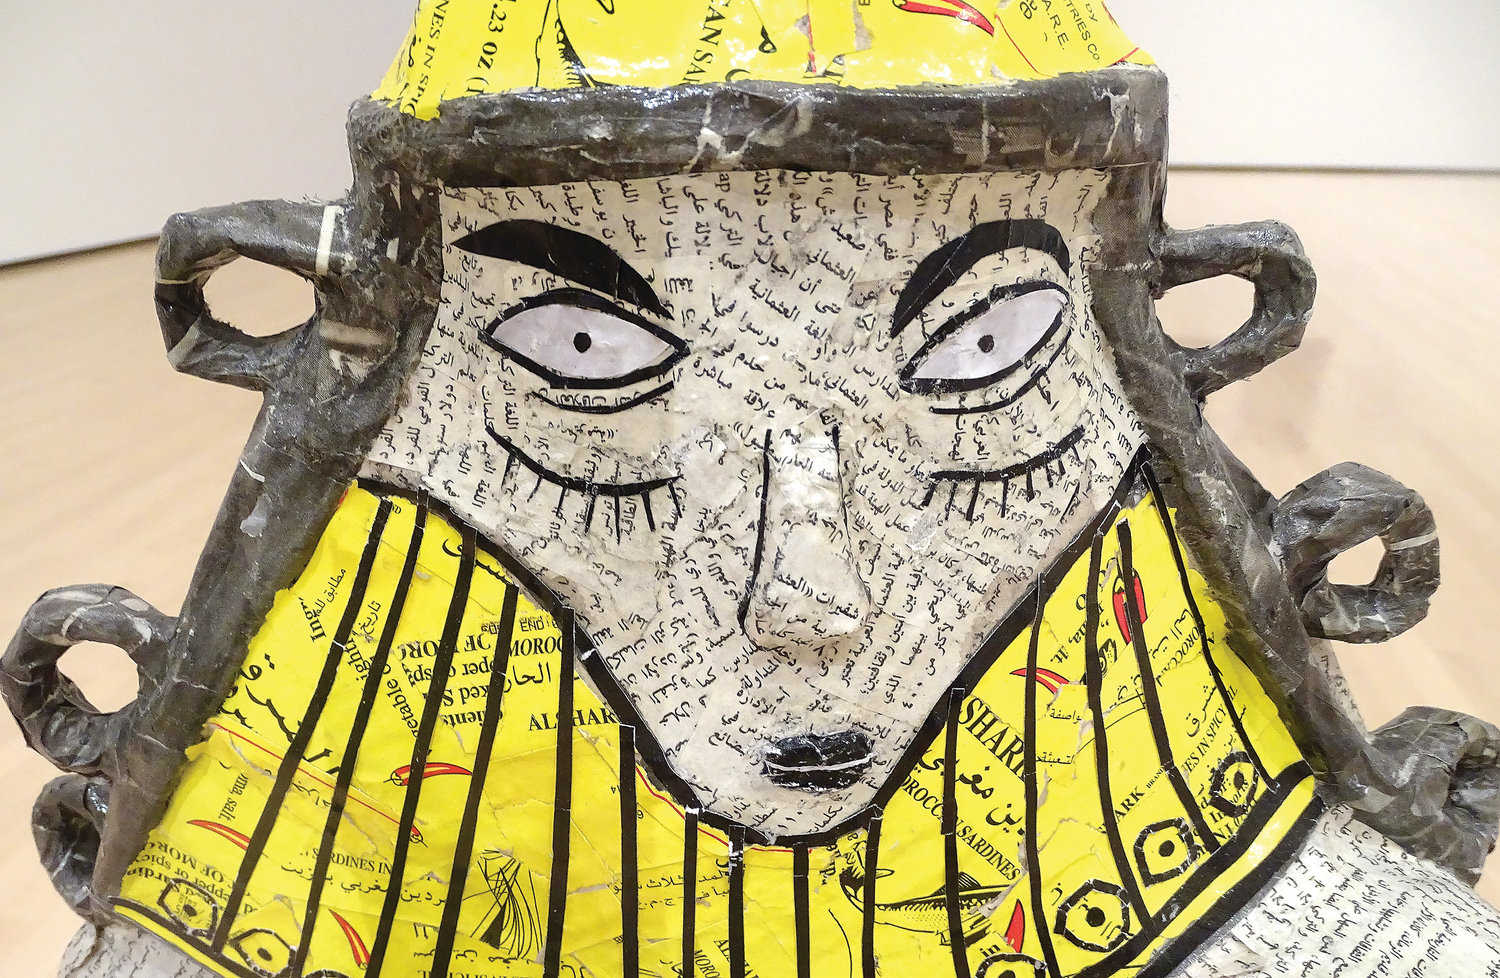 Iraqi-American artist Michael Rakowitz used newspapers and sardine cans to re-create a 2,000-year-old artifact plundered from the National Museum of Baghdad in the wake of the 2003 U.S. invasion.